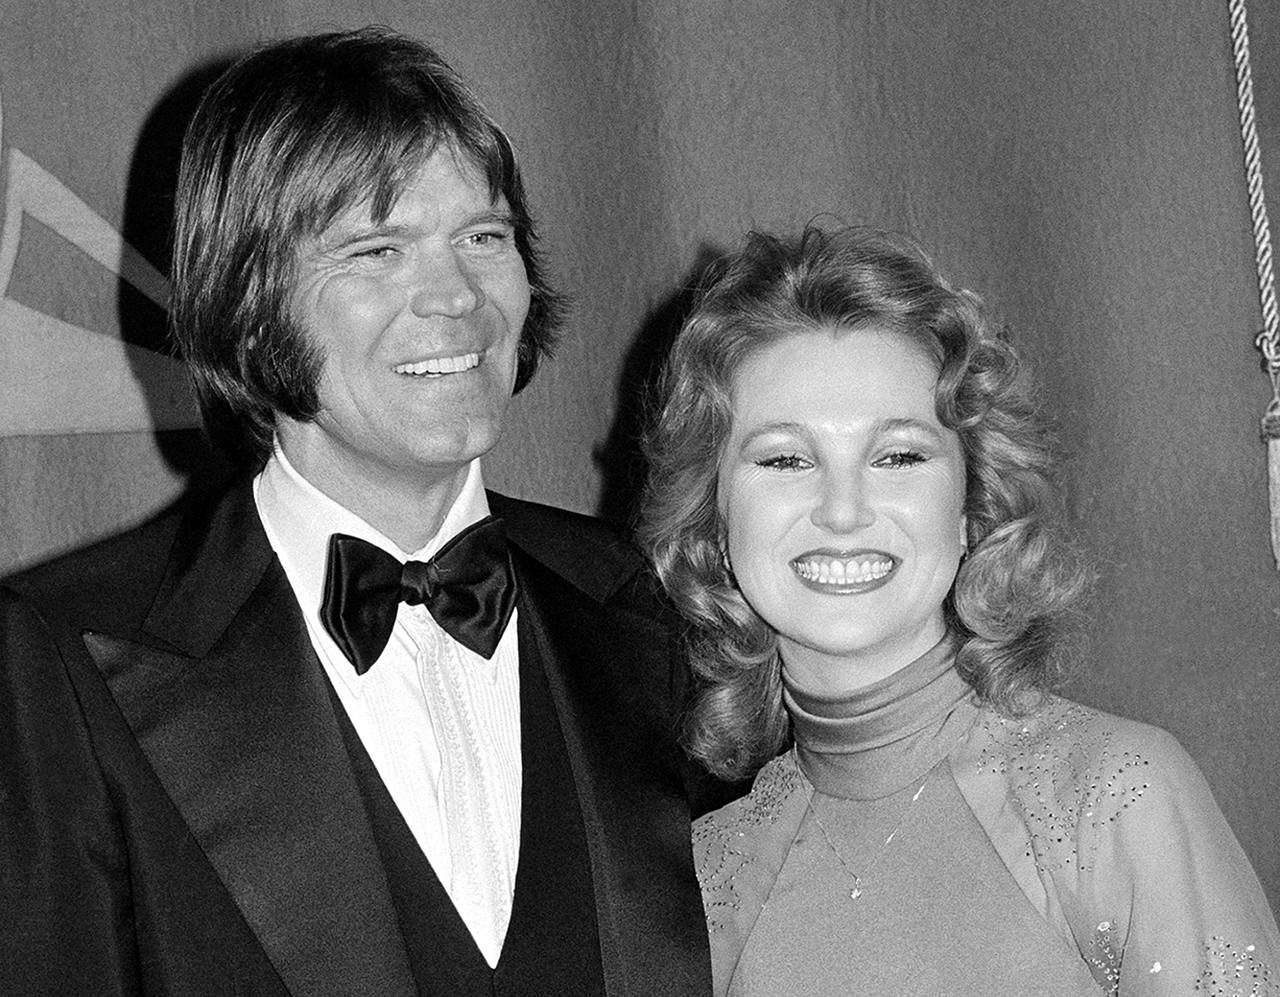 In this 1979 photo, country singers Glen Campbell and Tanya Tucker, engaged to one another, are shown at the Grammy Awards in Los Angeles. (AP Photo, File)